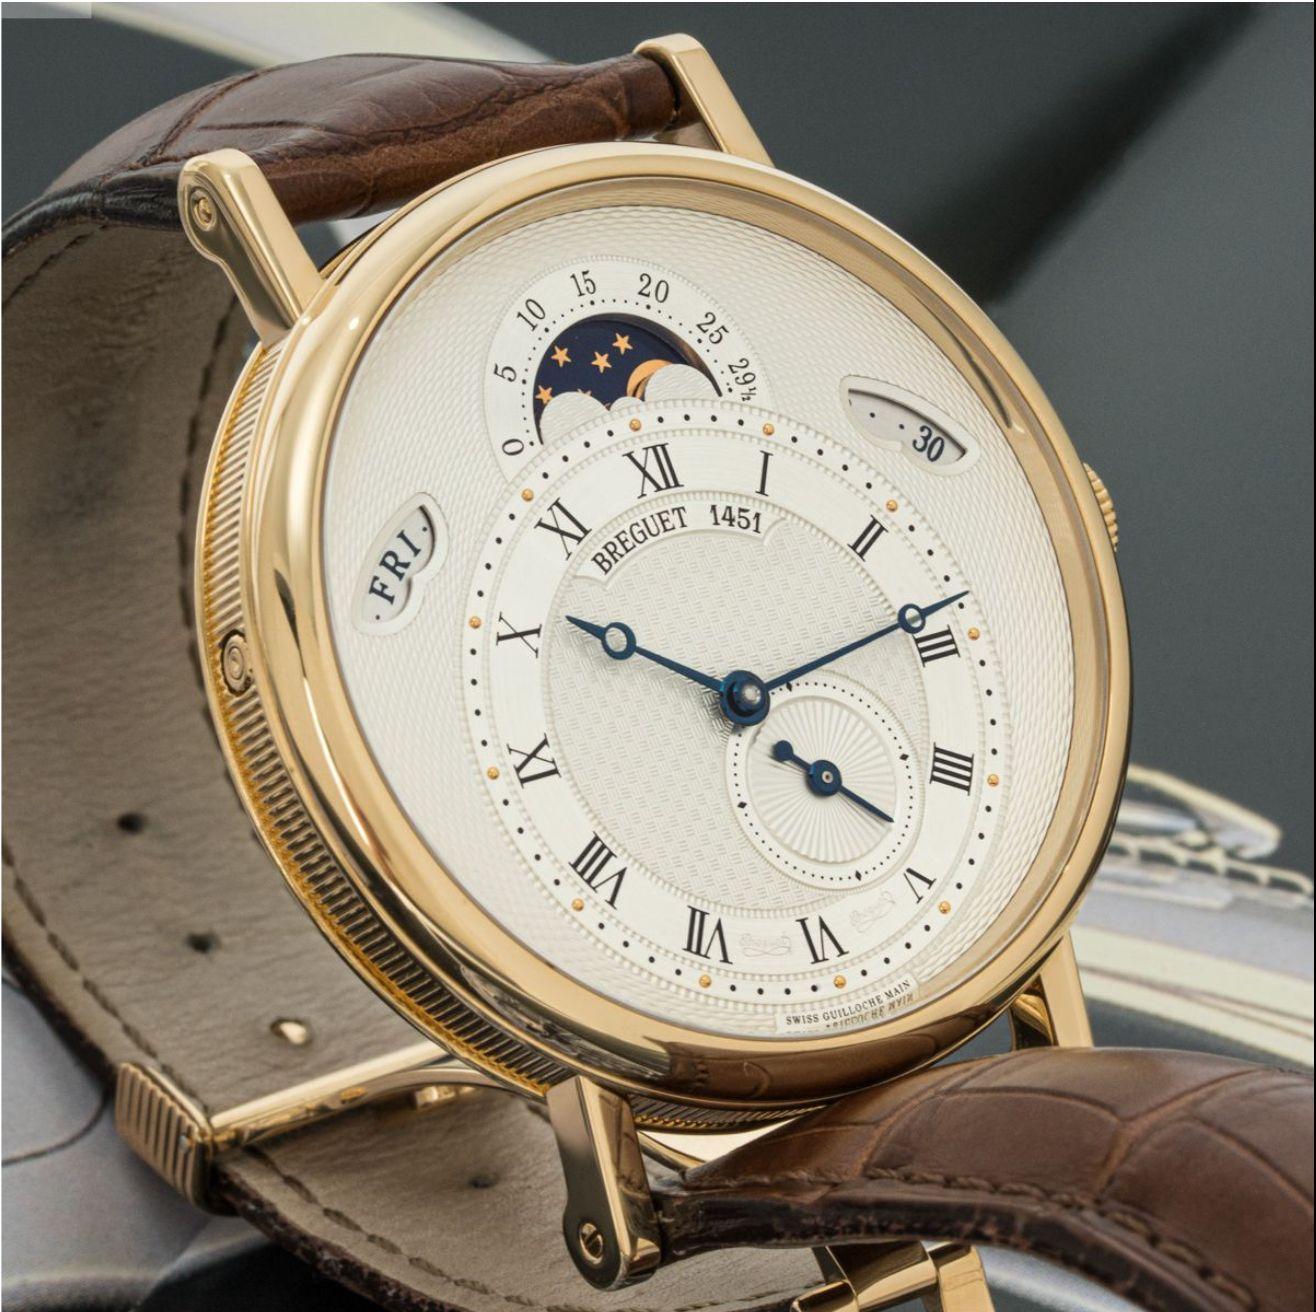 A Breguet Classique Calendrier wristwatch in yellow gold. Featuring a silver guilloche dial with a date, day and moon phase indicator as well as seconds sub-dial. Fitted with a sapphire glass, a self-winding automatic movement and a brown Breguet